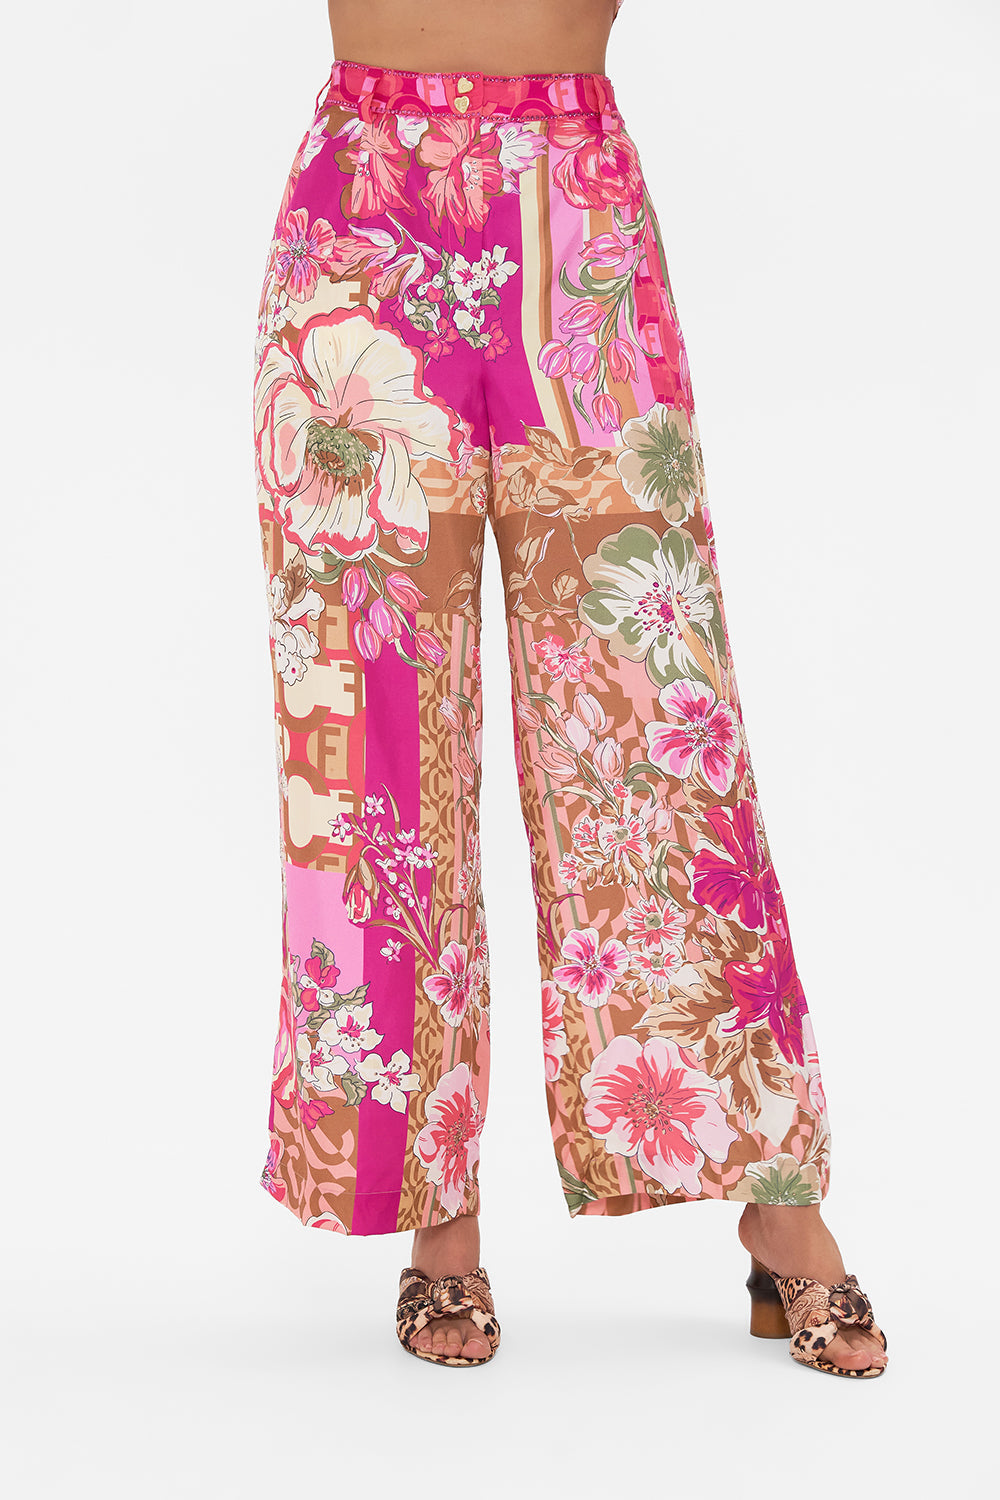 WIDE LEG WAISTED PANT A GIRL NAMED FLORENCE